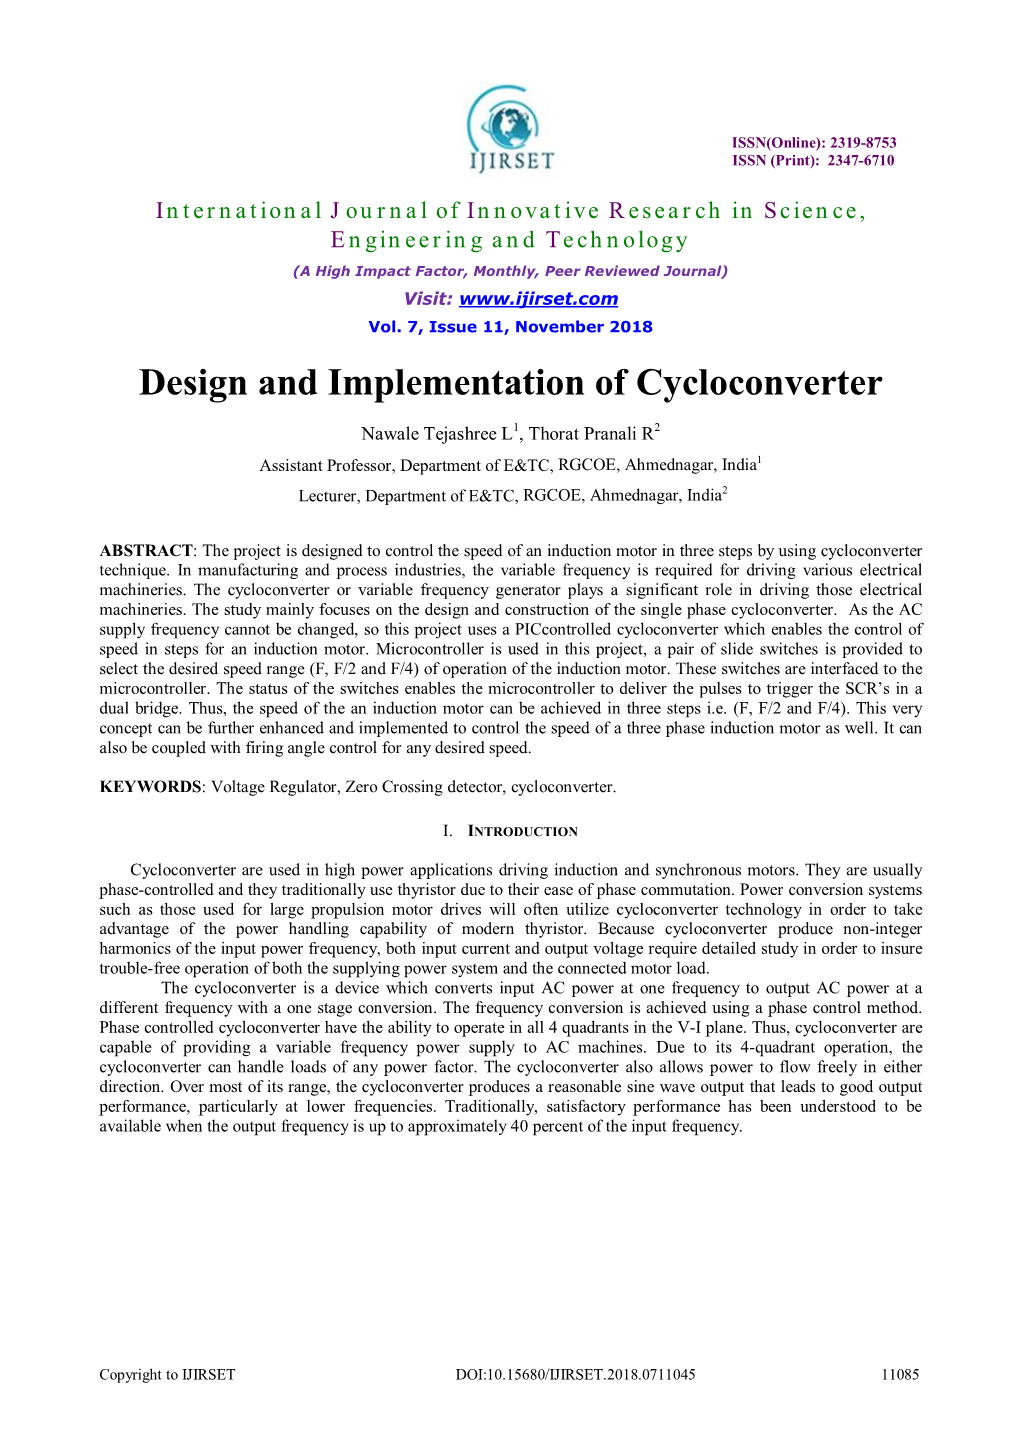 Design and Implementation of Cycloconverter